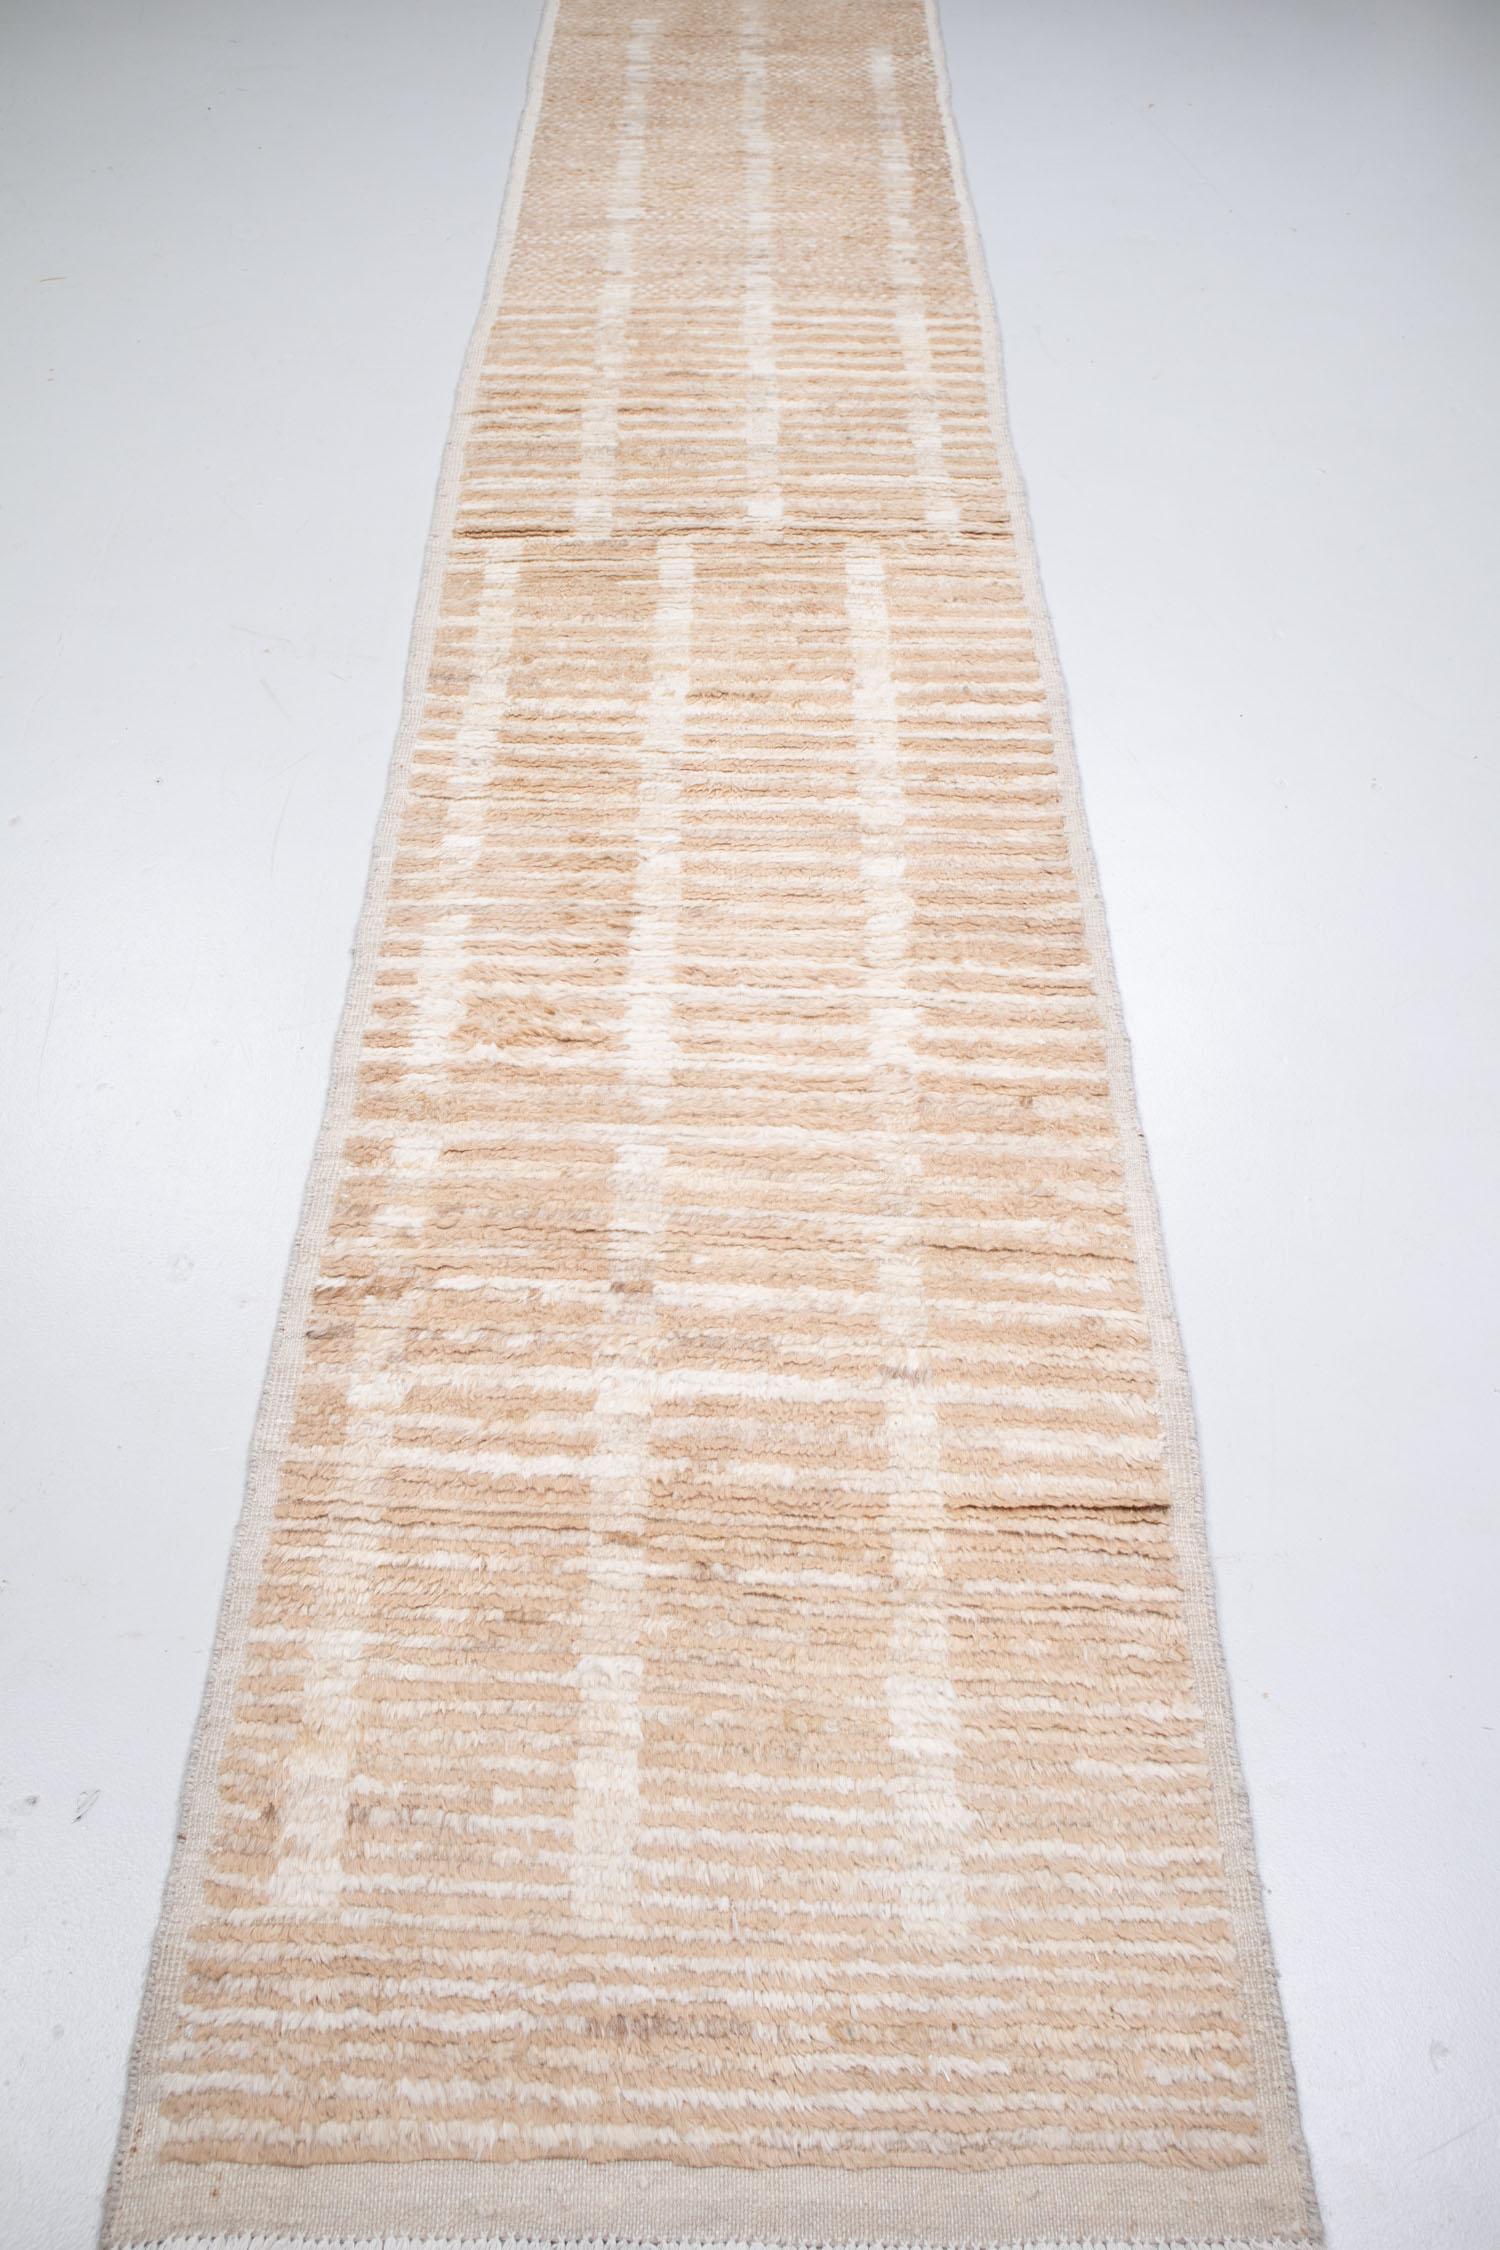 Expertly crafted by hand using 100% wool, this new production Tulu runner has a warm beige and sandy color palette. We love the elegantly understated pattern that is unique and whimsical.